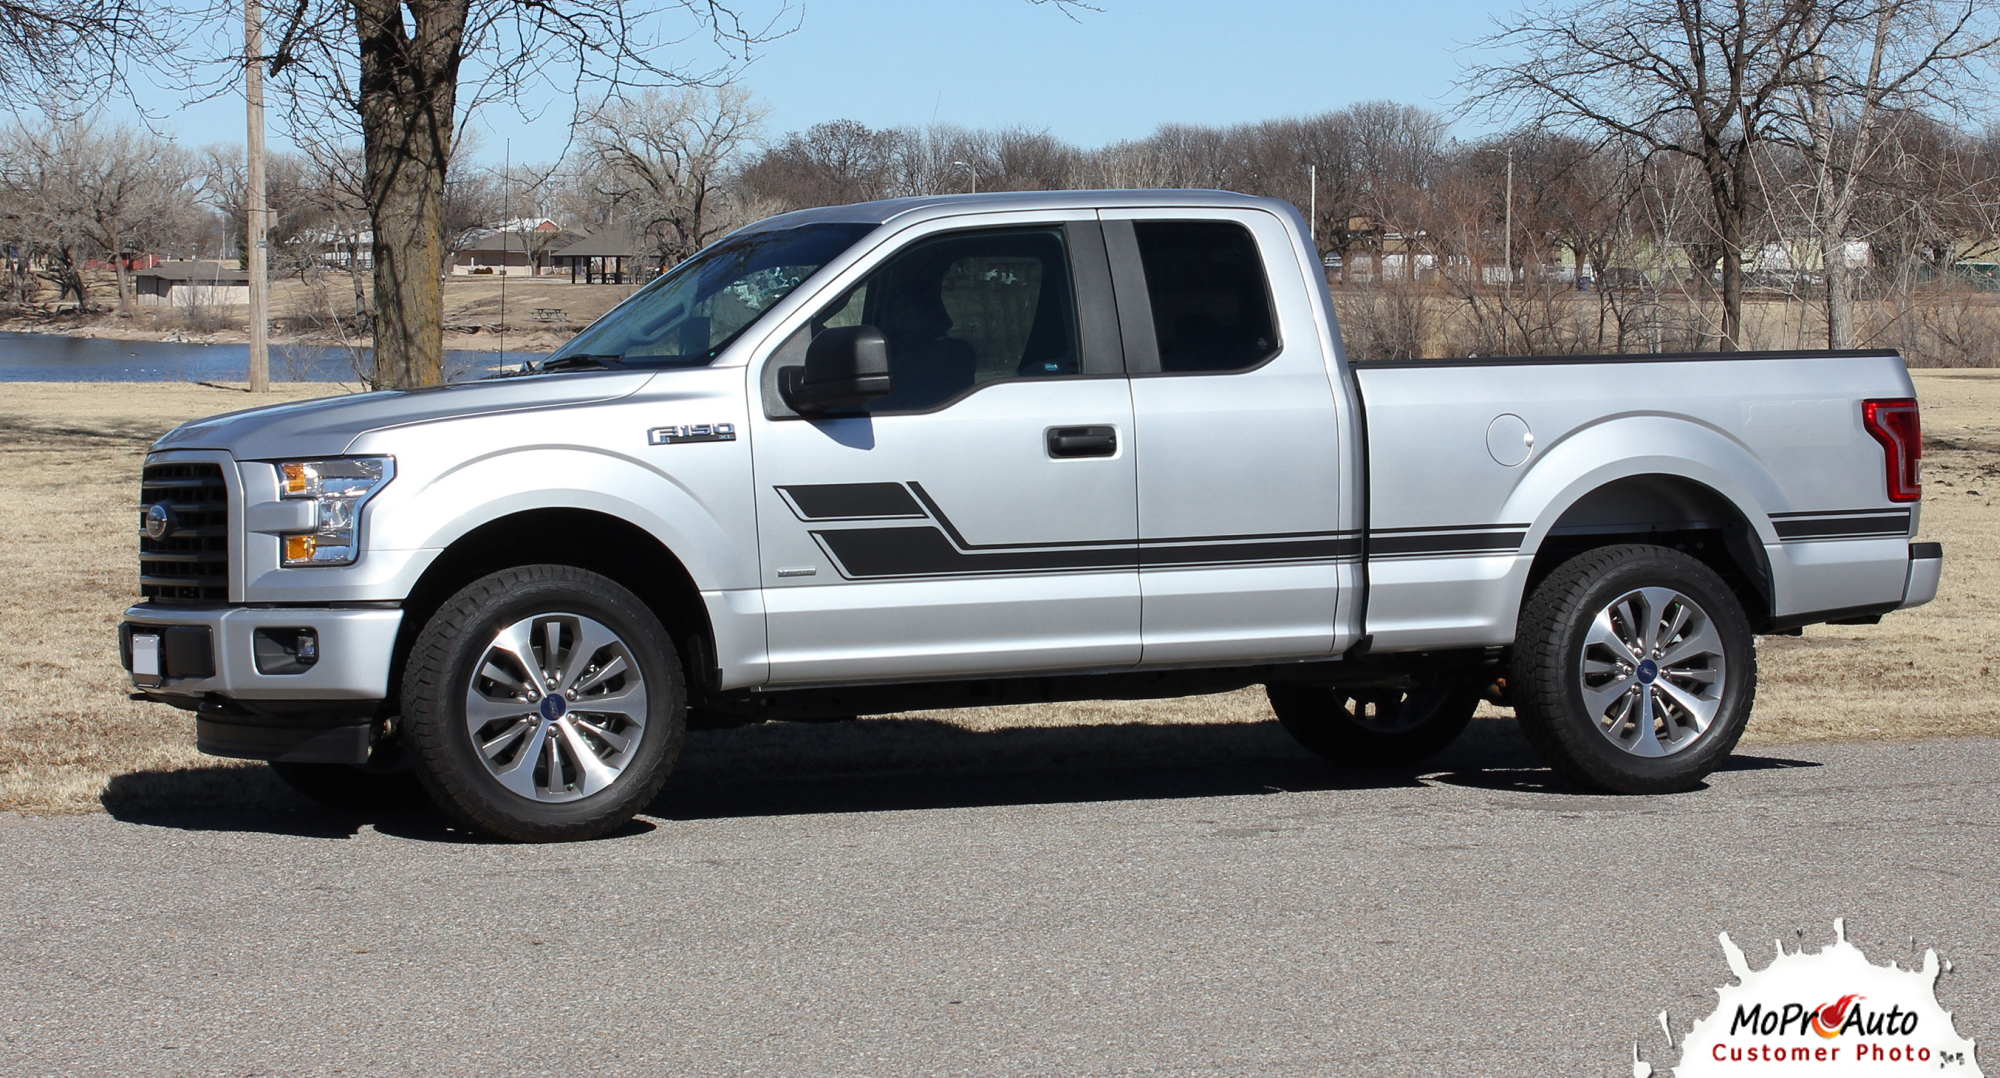 ELIMINATOR Hockey Door Ford F-Series F-150 Appearance Package Vinyl Graphics and Decals Kit - Customer Photo